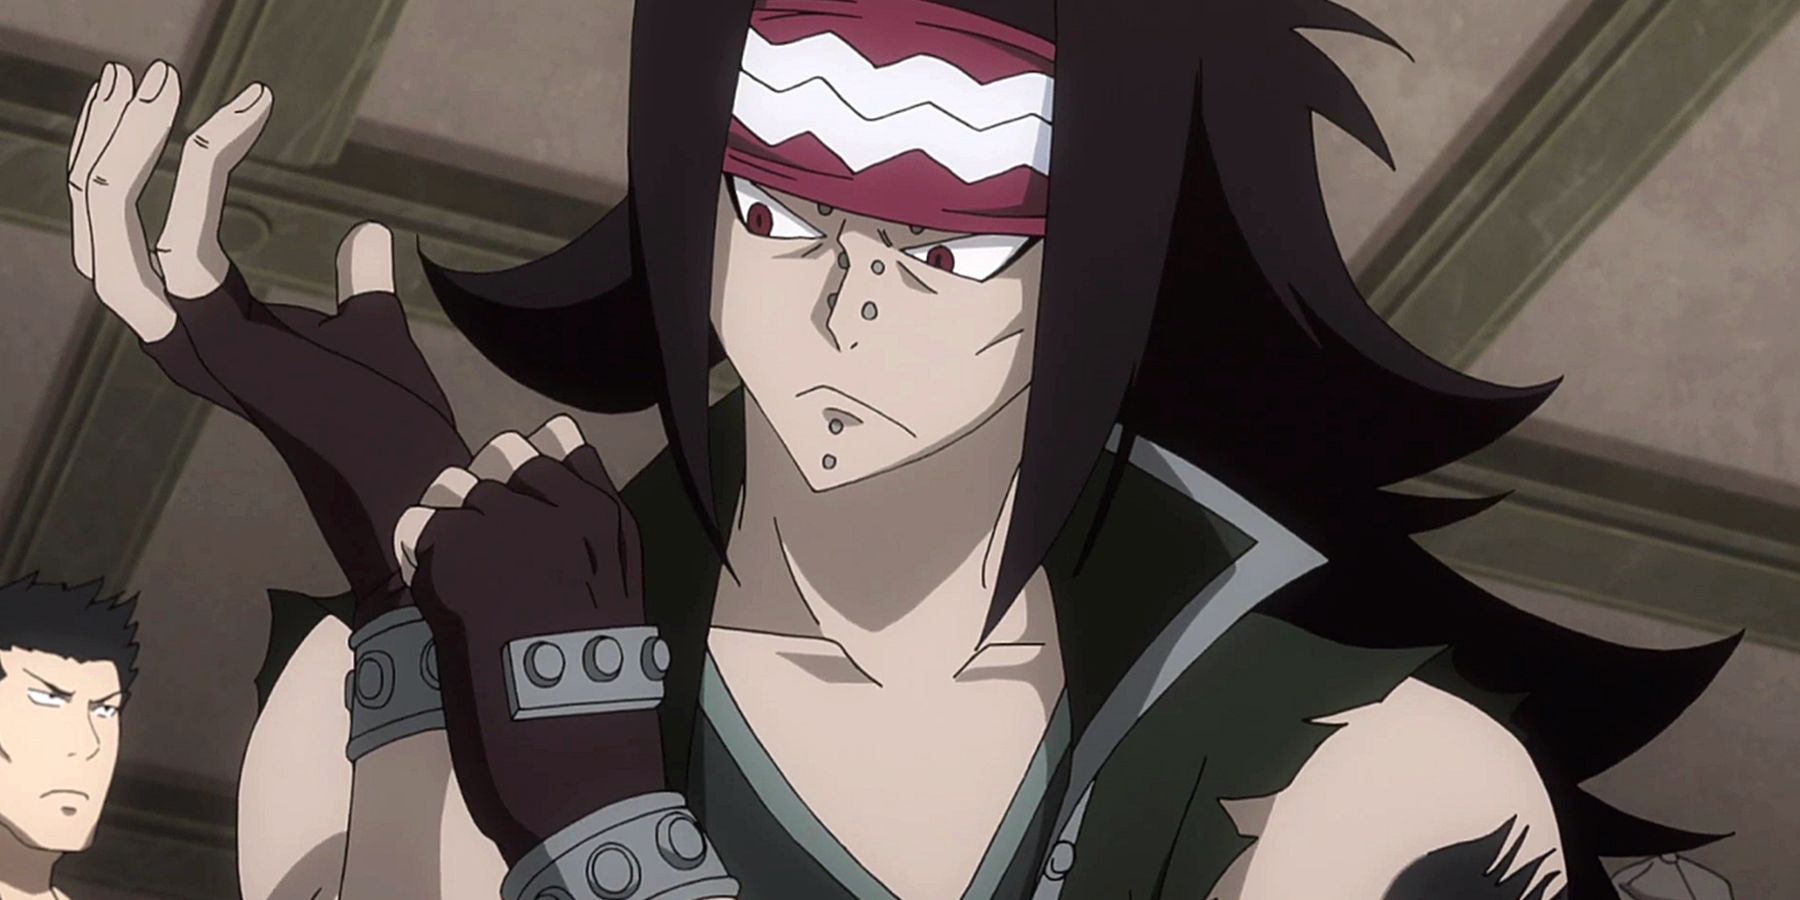 Gajeel from Fairy Tail.